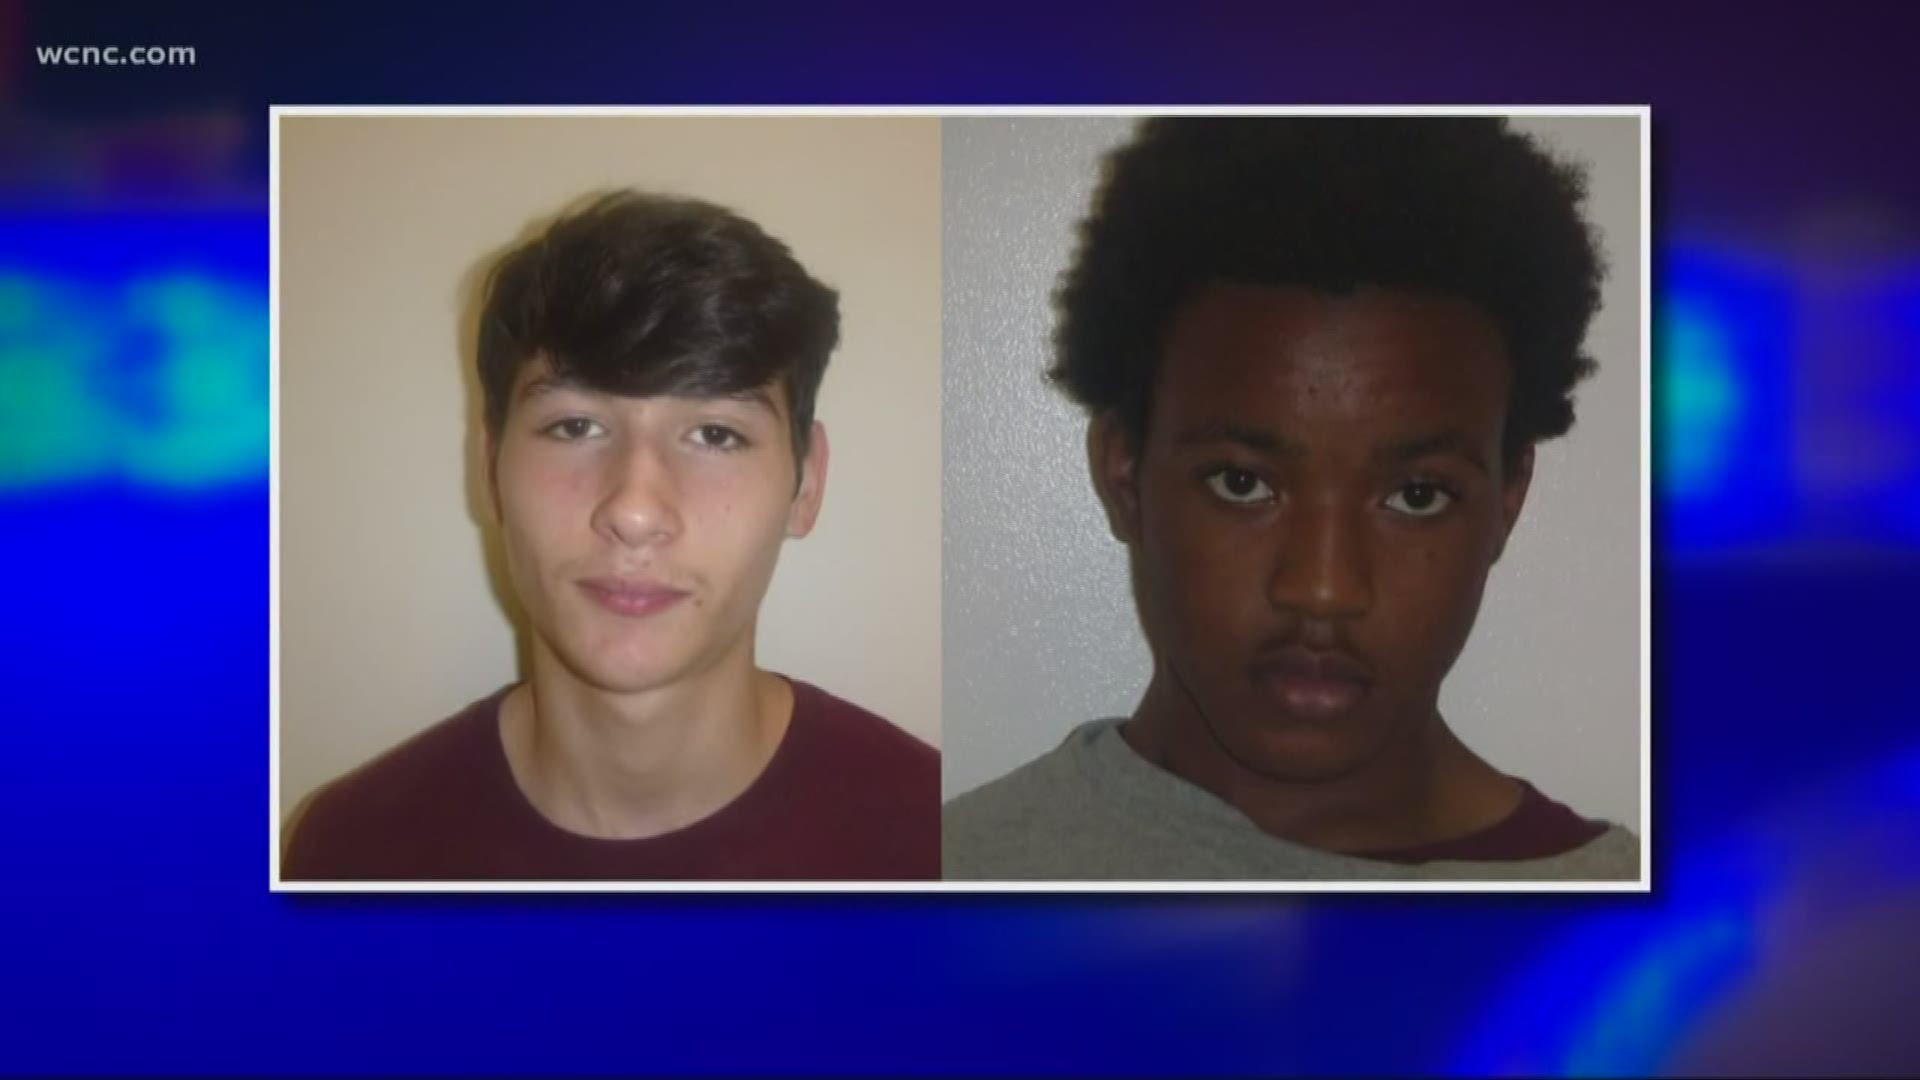 They're identified as Christopher H. and Mikal M. Their last names and ages have not been released, but officials say there is a 'high degree of concern' for safety.